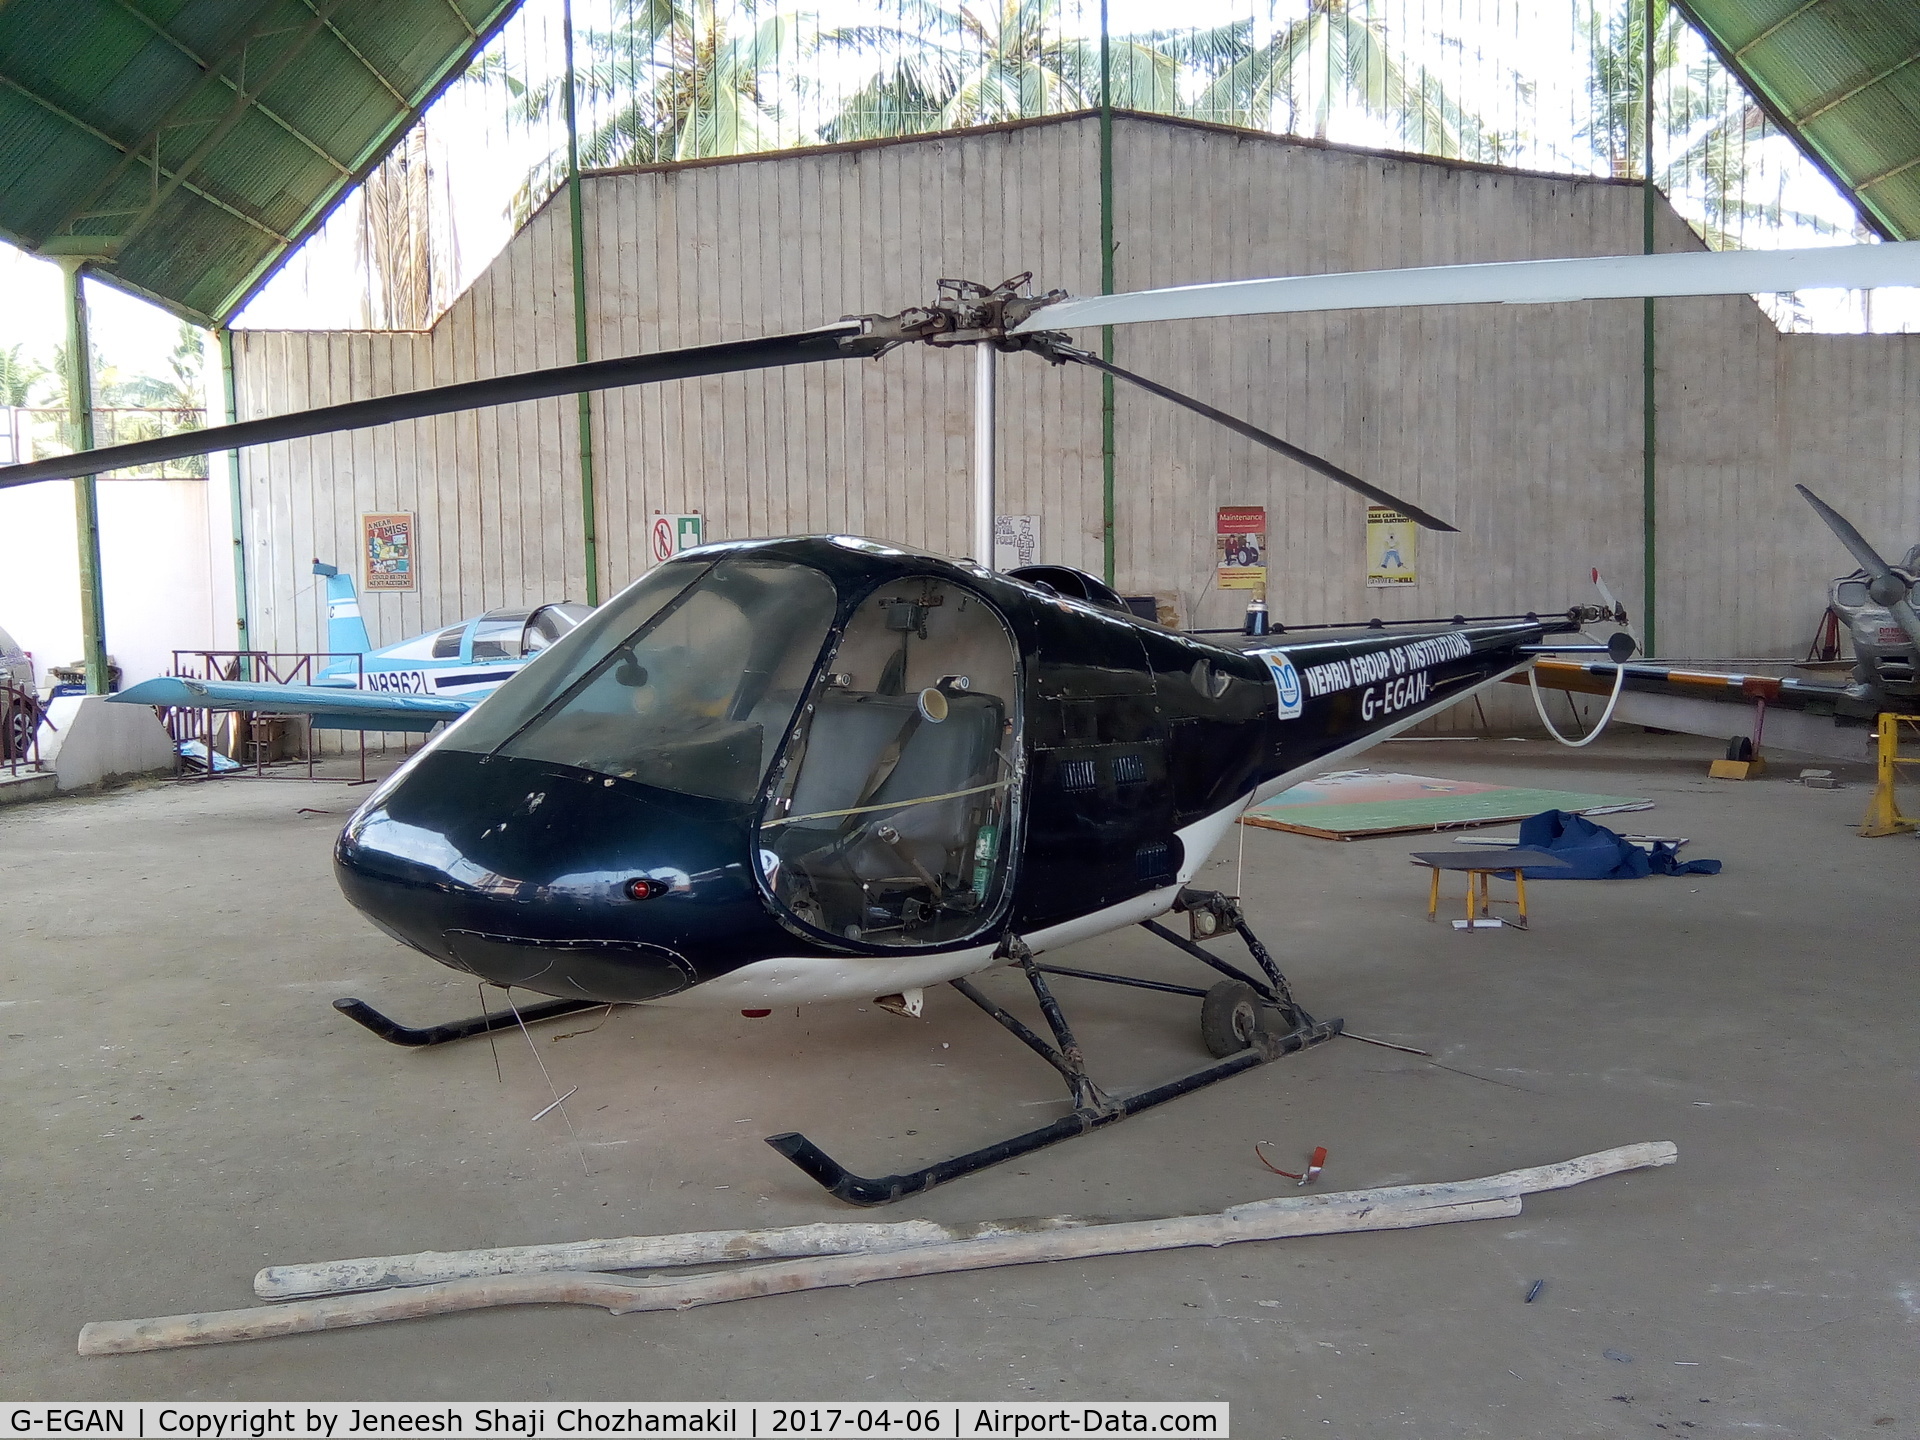 G-EGAN, 1972 Enstrom F-28A-UK C/N 103, At Nehru College Of Aeronautics And Applied Science, Coimbatore, India